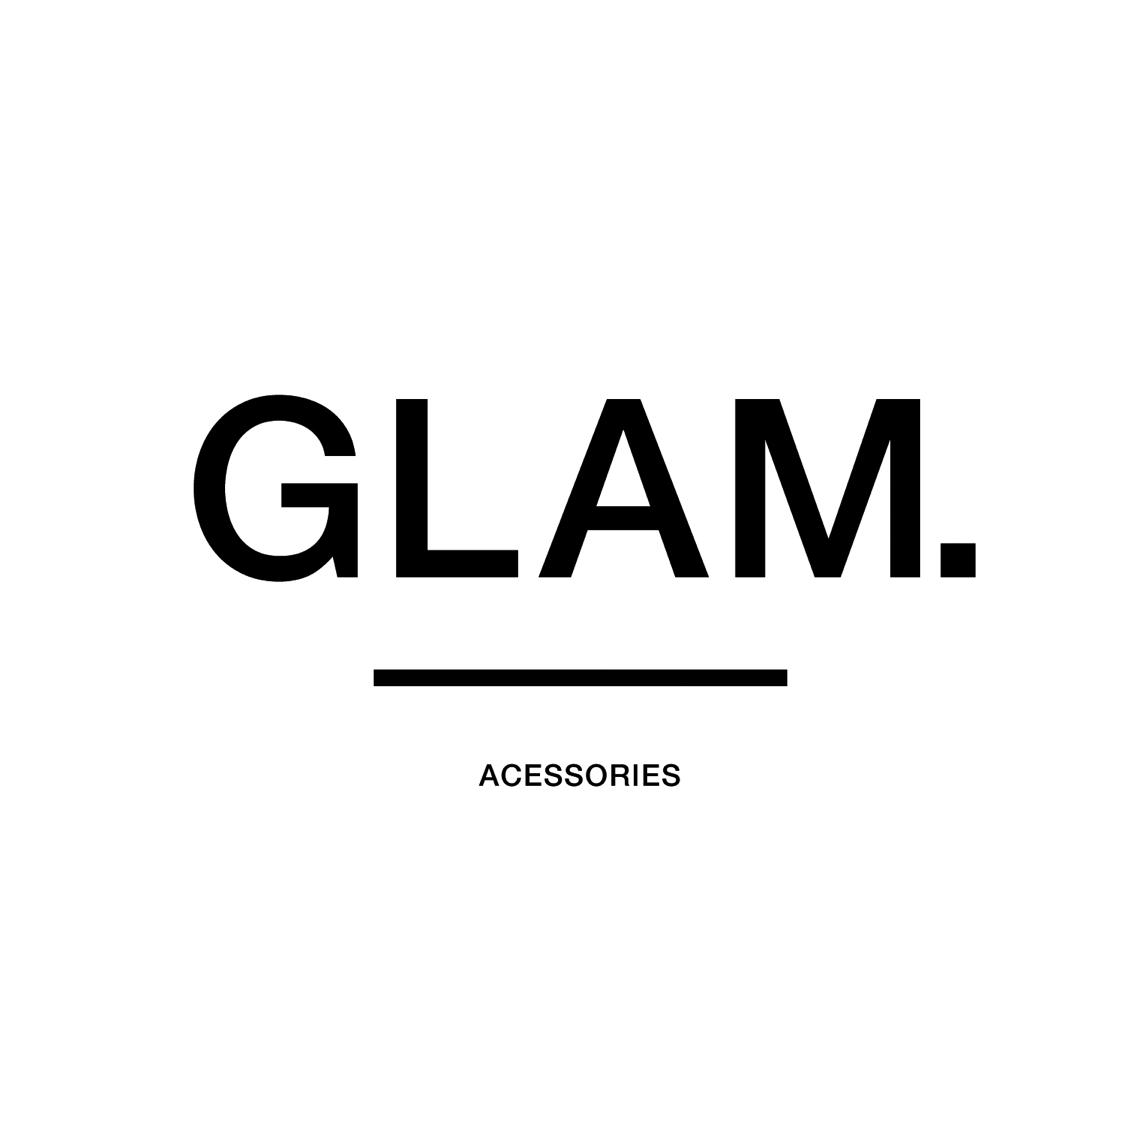 GLAM.'s images